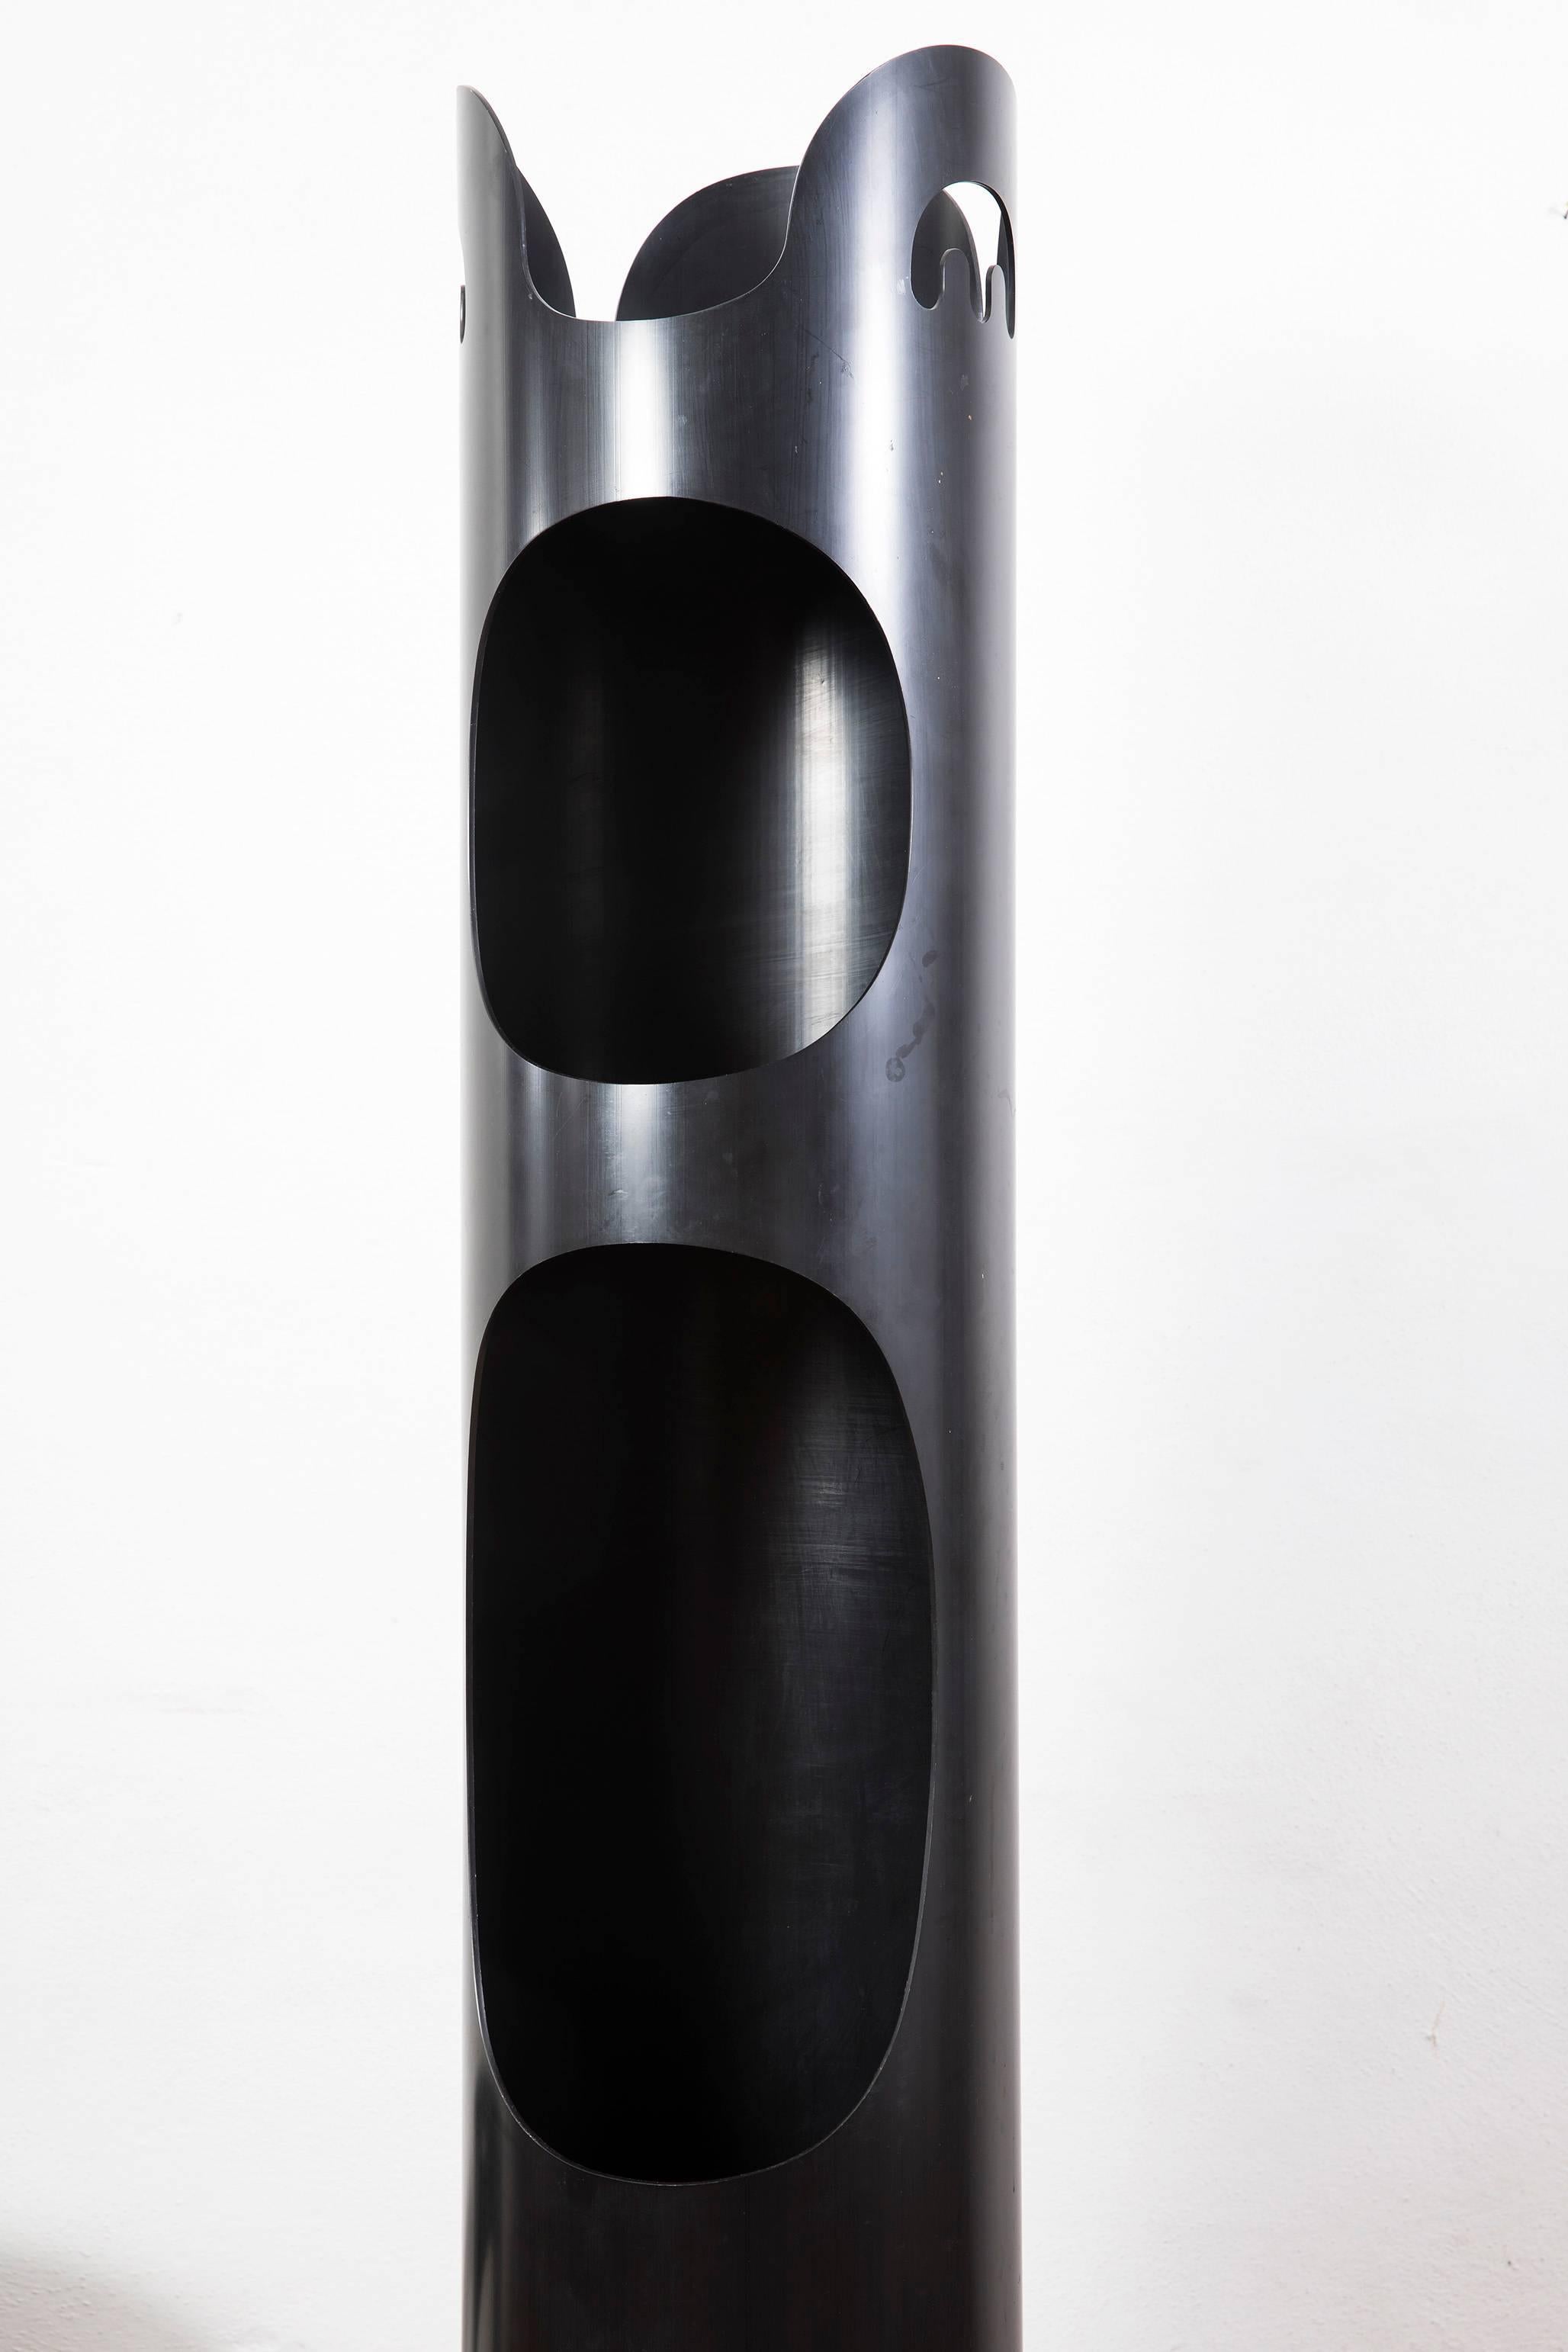 Beautiful set composed by 'Kerguelen' coat rack with umbrella Stand and 'Mascarene' paper bin designed by Enzo Mari, manufactured by Danese, Italy in 1968.
These two beautiful design pieces are made of black PVC, Kerguelen coat rack has a concrete